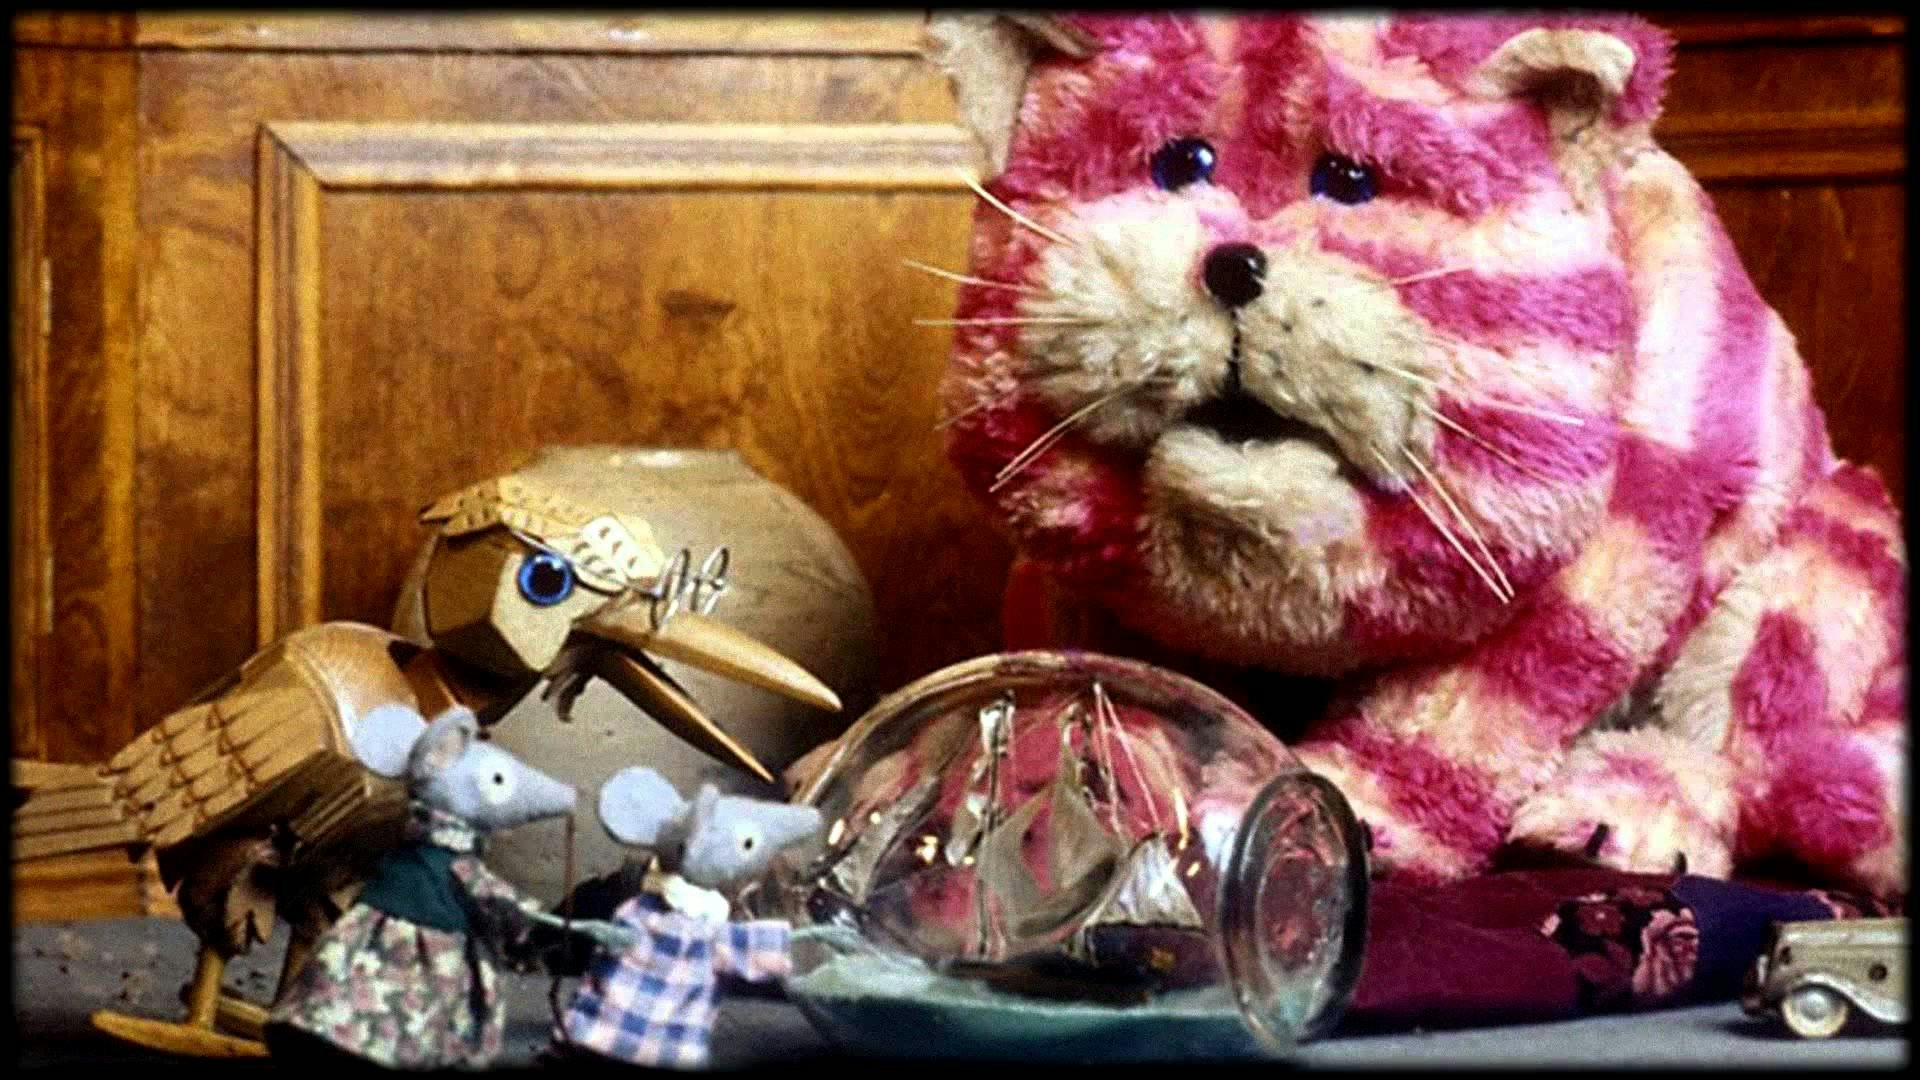 Close-Up Stuffed Animal on Motorcycle Live Wallpaper - free download